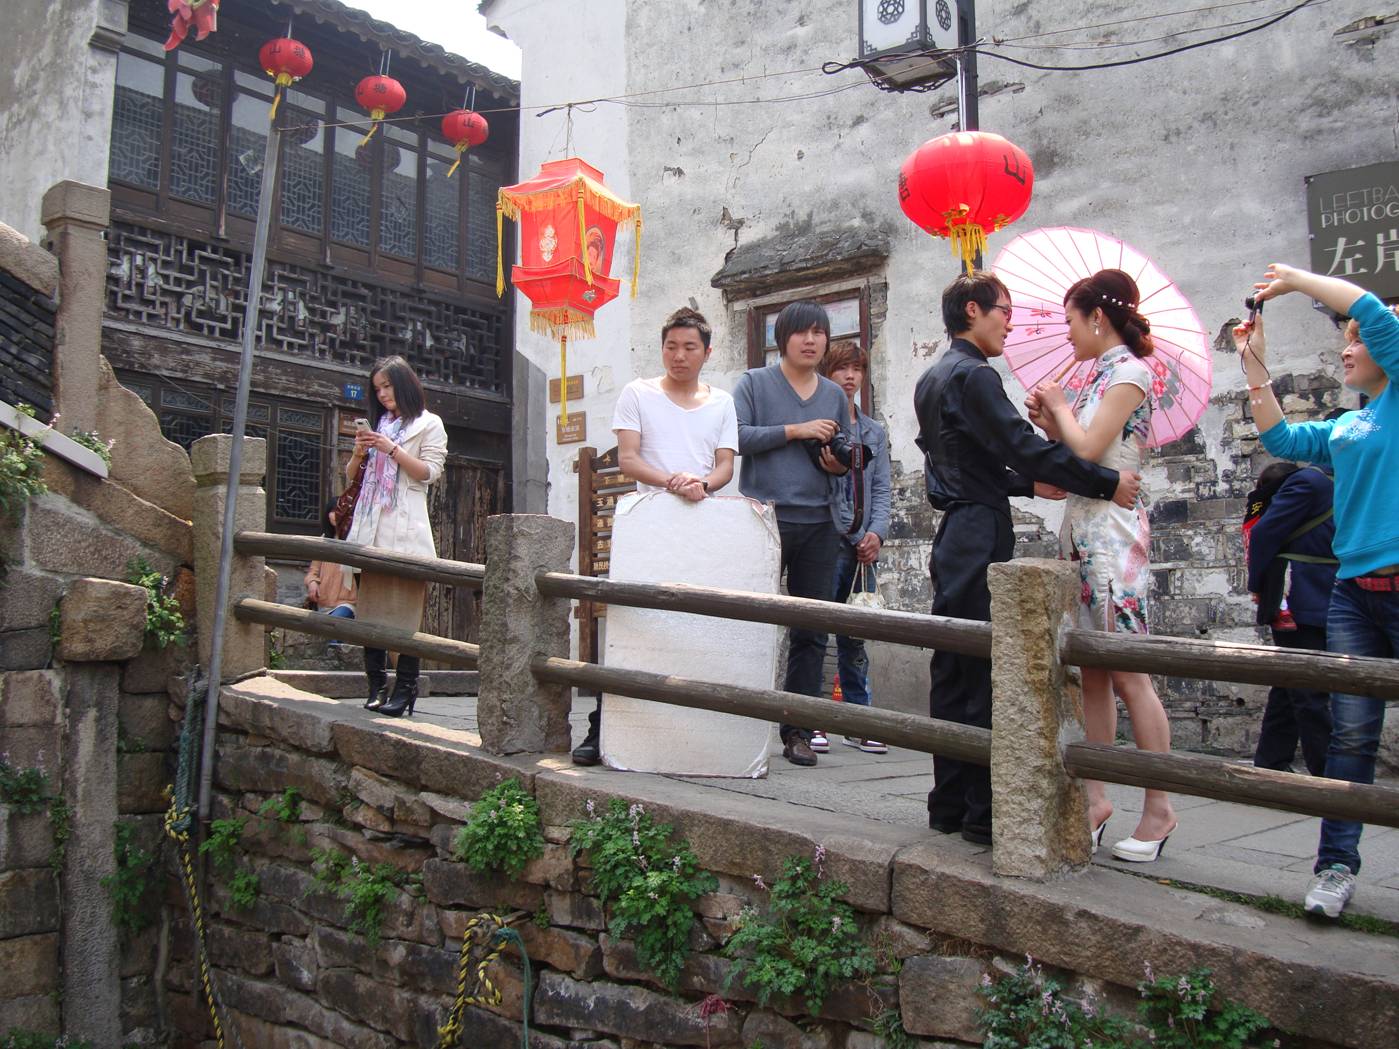 Picutre:  Wedding photography day on the banks of the Suzhou canal, Suzhou, China